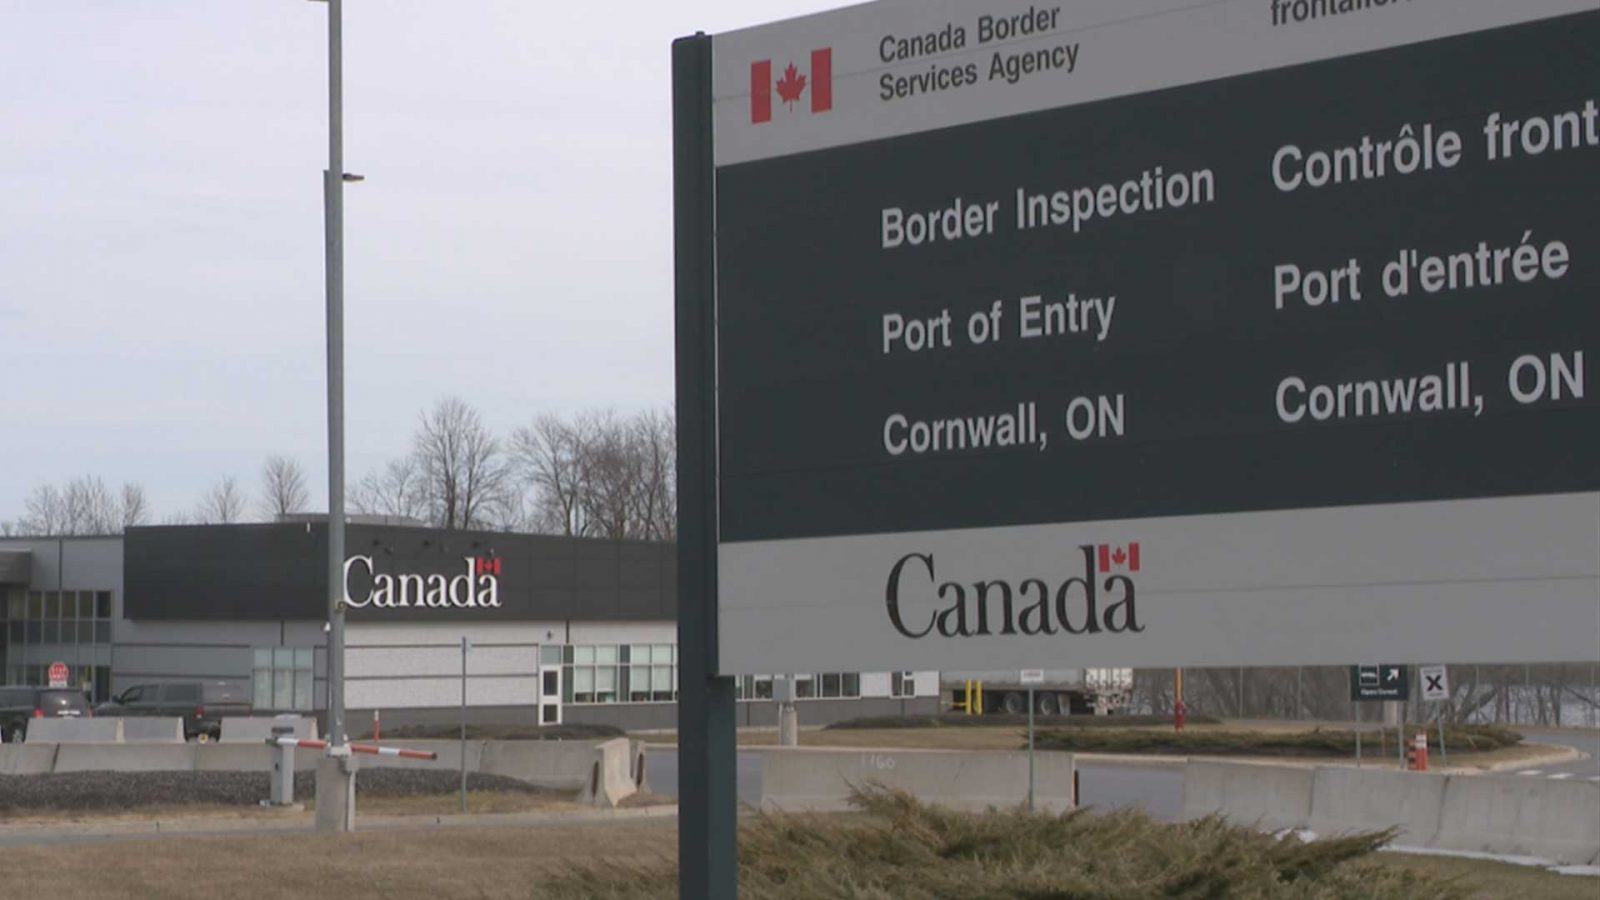 Crossing the border this summer – The CBSA gives tips this Canada Day and Independence Day long weekend